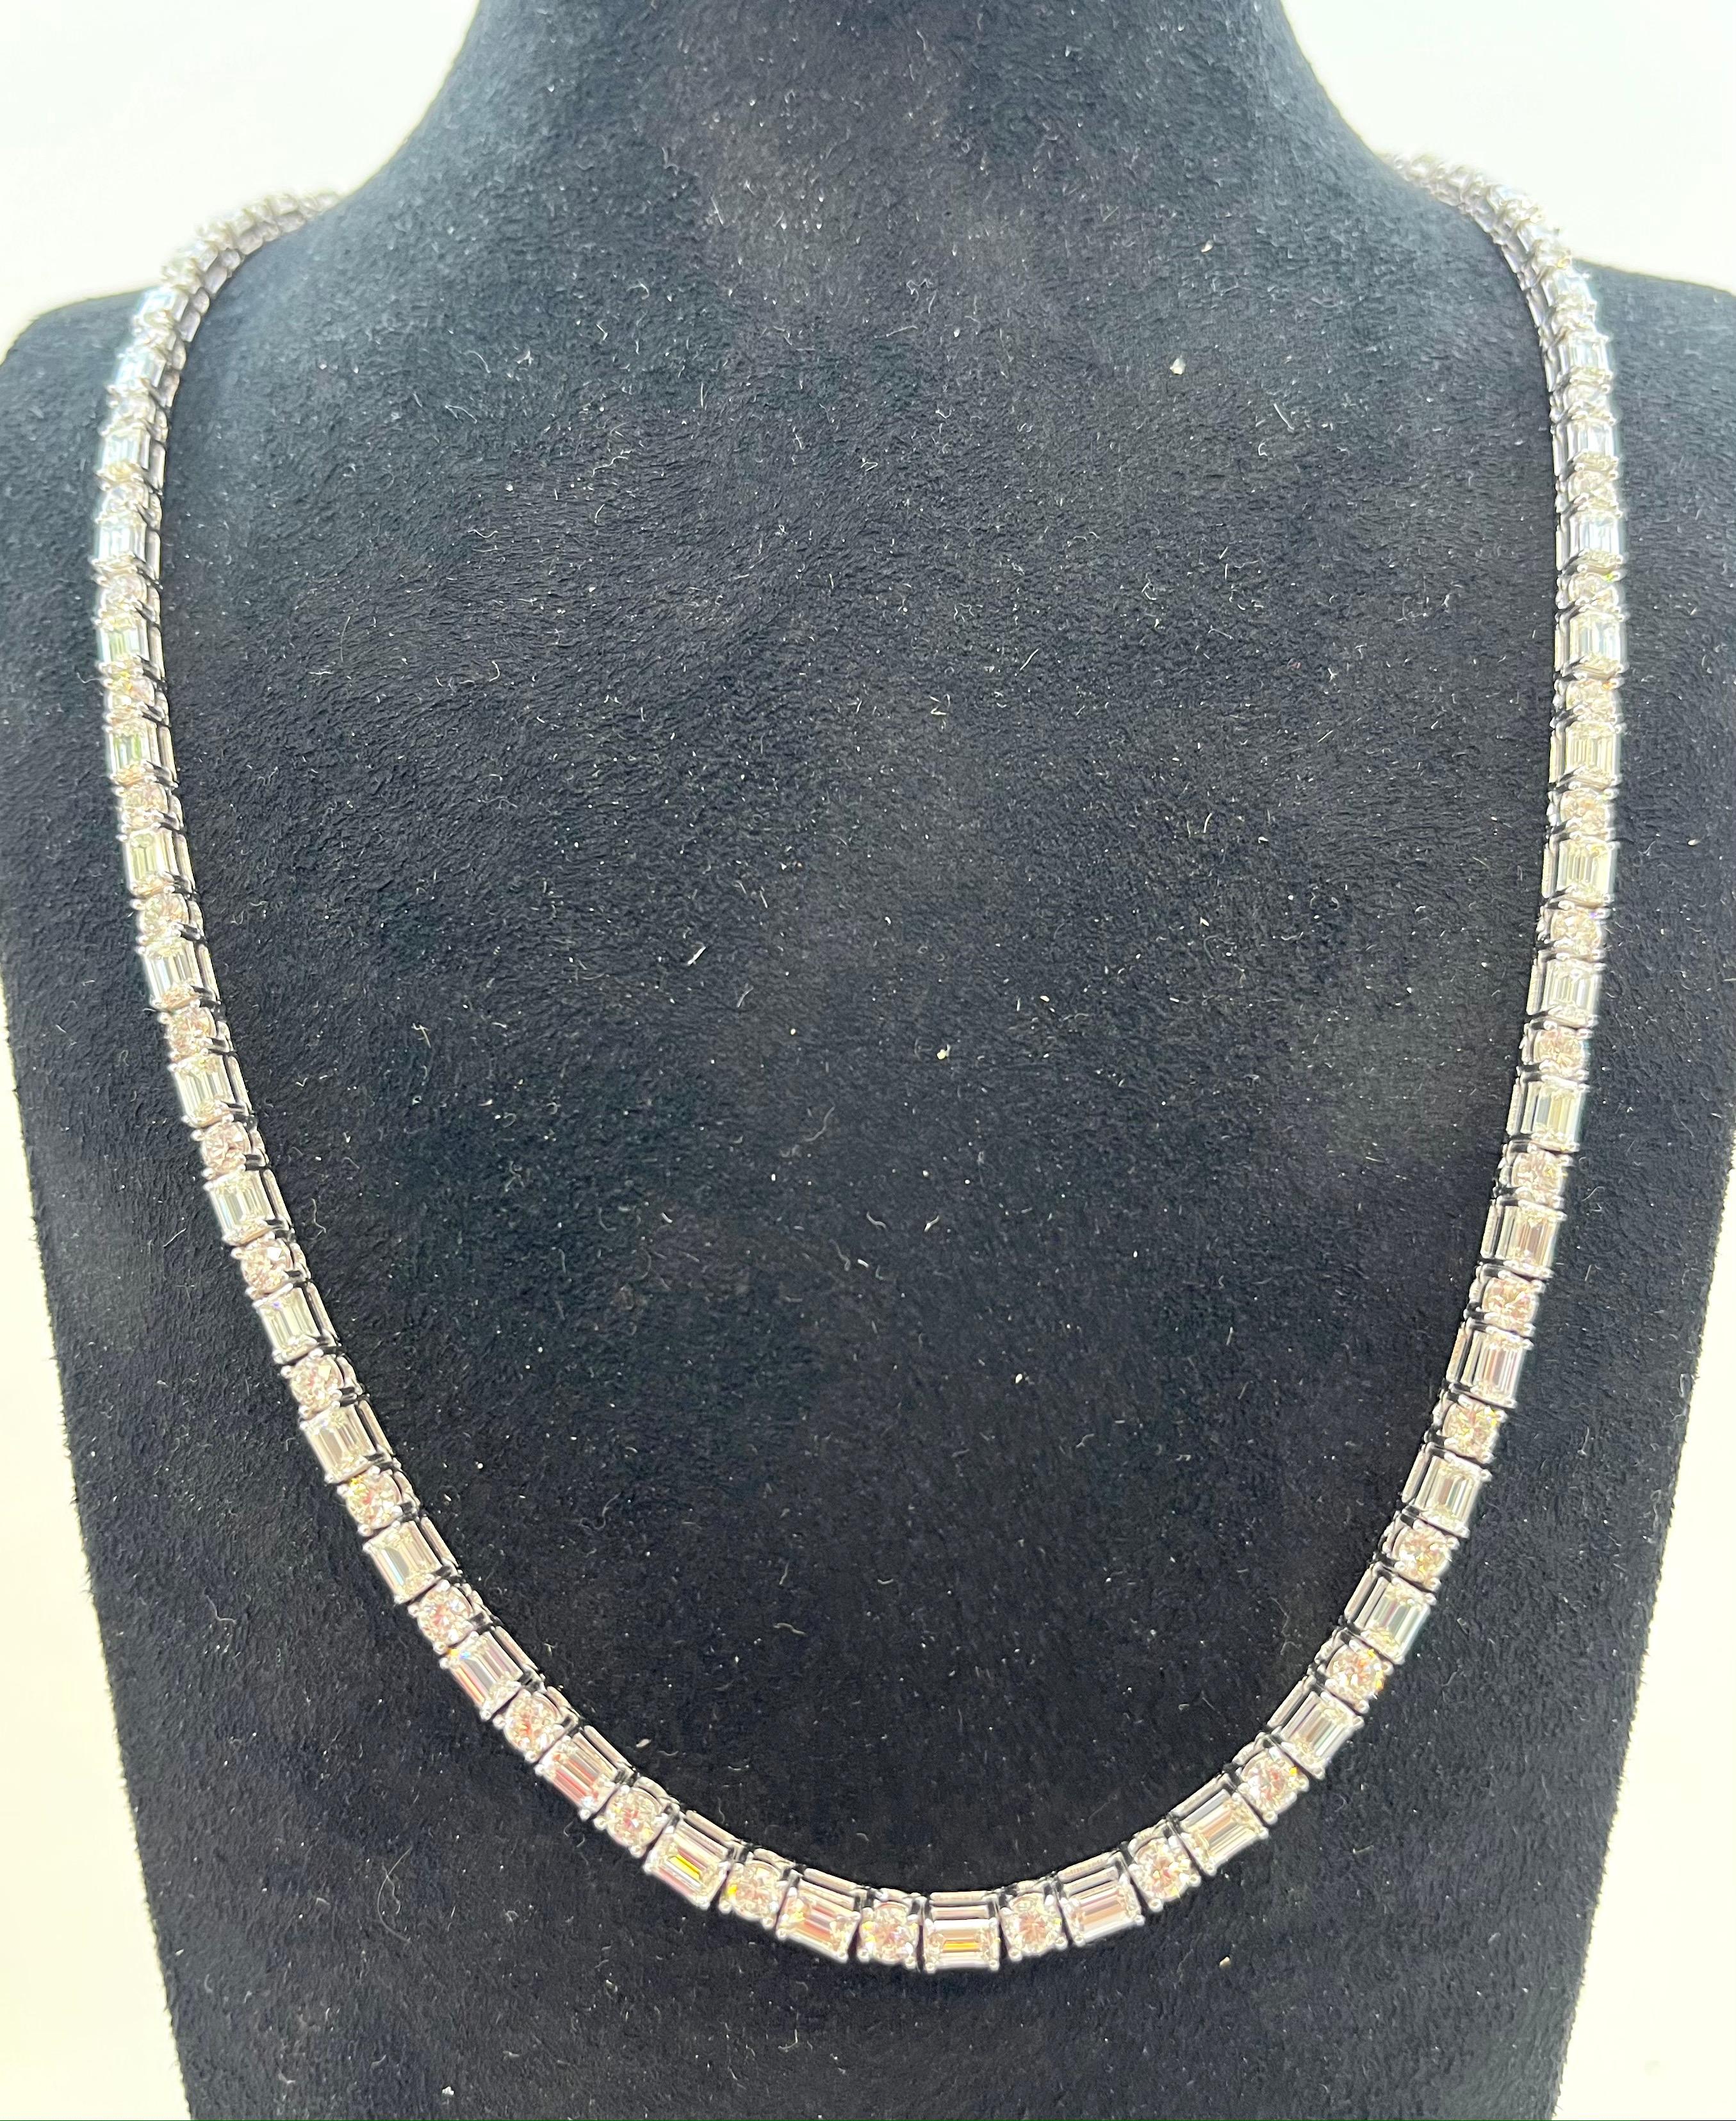  Luxurious 17 Carat Natural Round Diamond and Emerald-Cut Diamond Riviera Necklace in 18K White Gold - Exquisite Elegance!

Description:
Indulge in opulent sophistication with this breathtaking Riviera necklace, meticulously crafted in solid 18